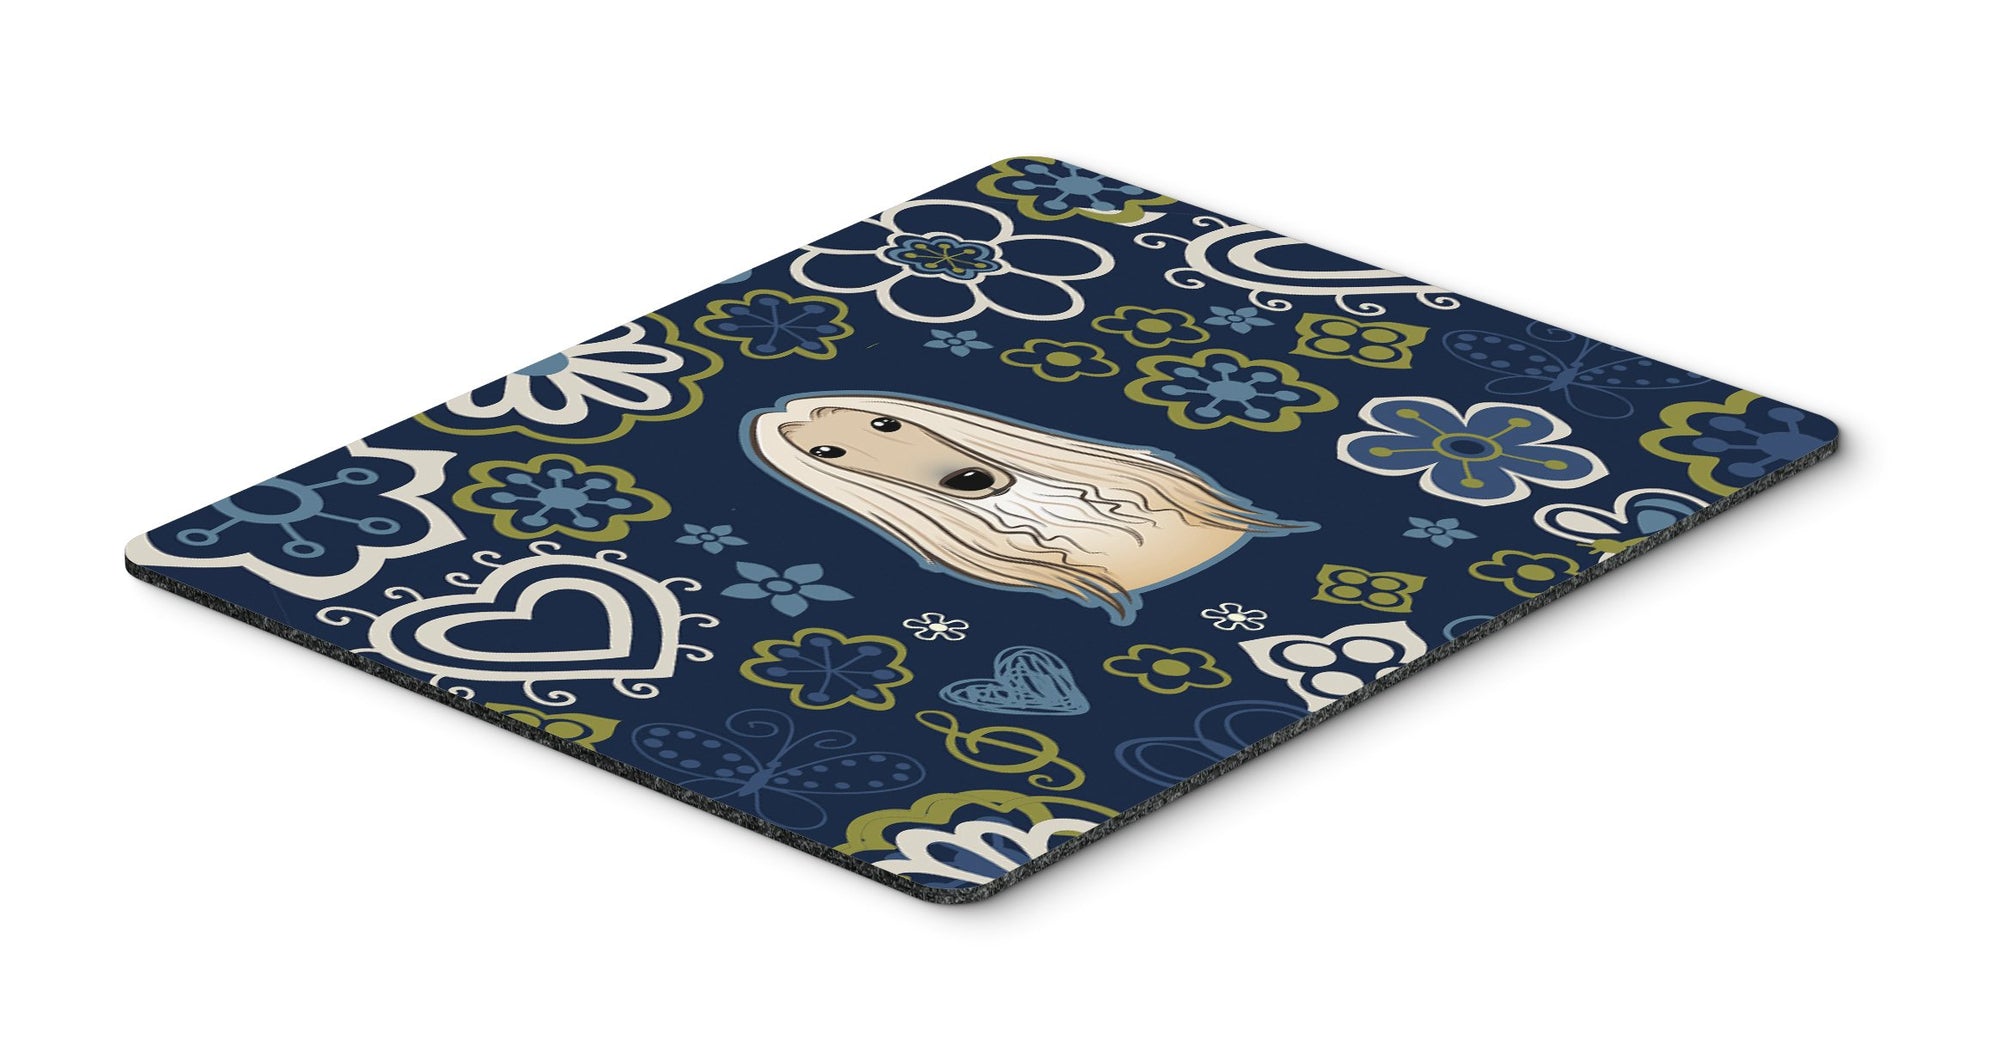 Blue Flowers Afghan Hound Mouse Pad, Hot Pad or Trivet by Caroline's Treasures